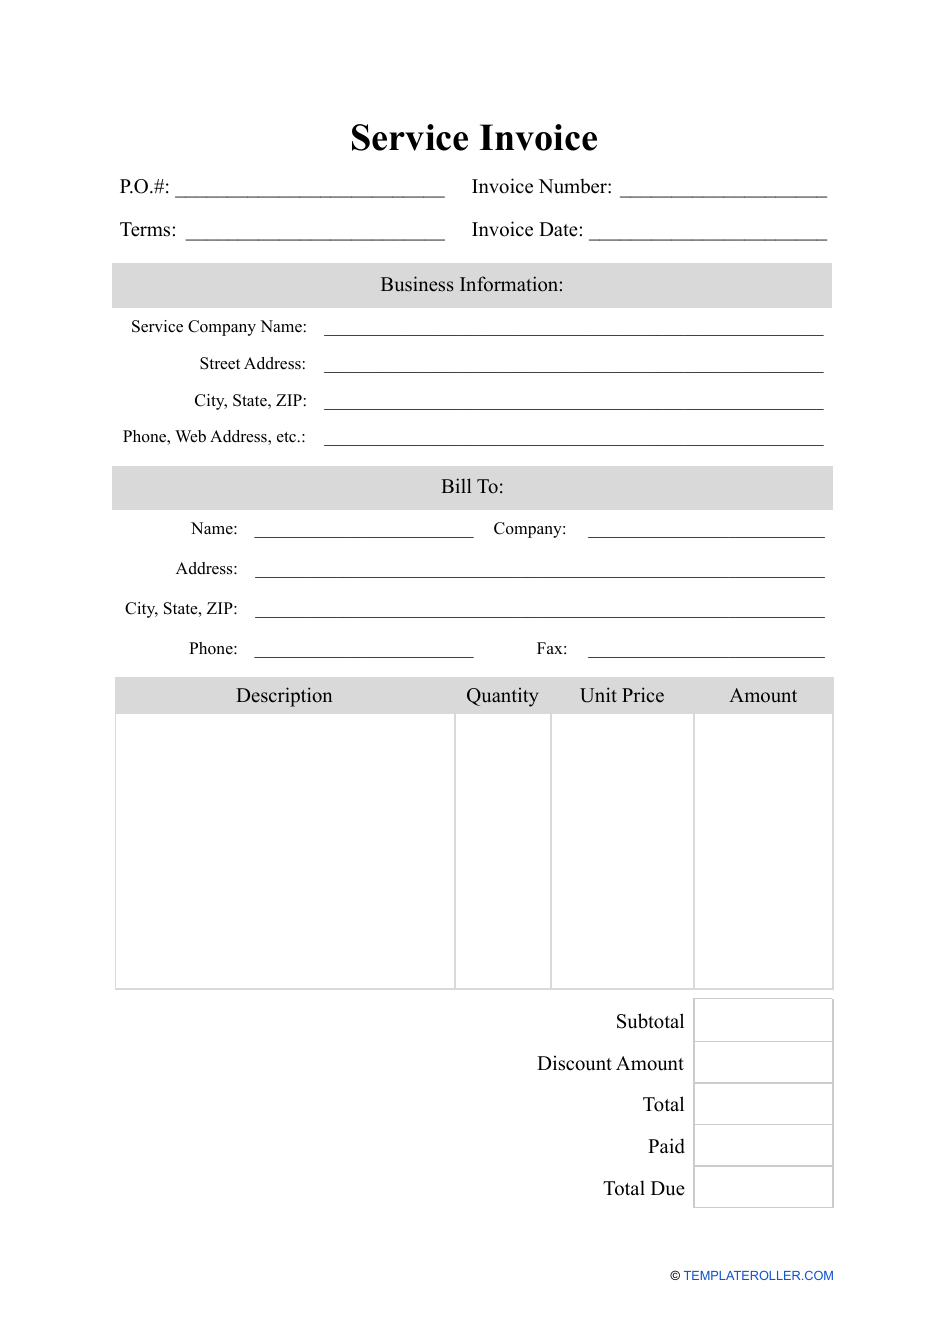 Service Invoice Template With Discount Amount, Page 1